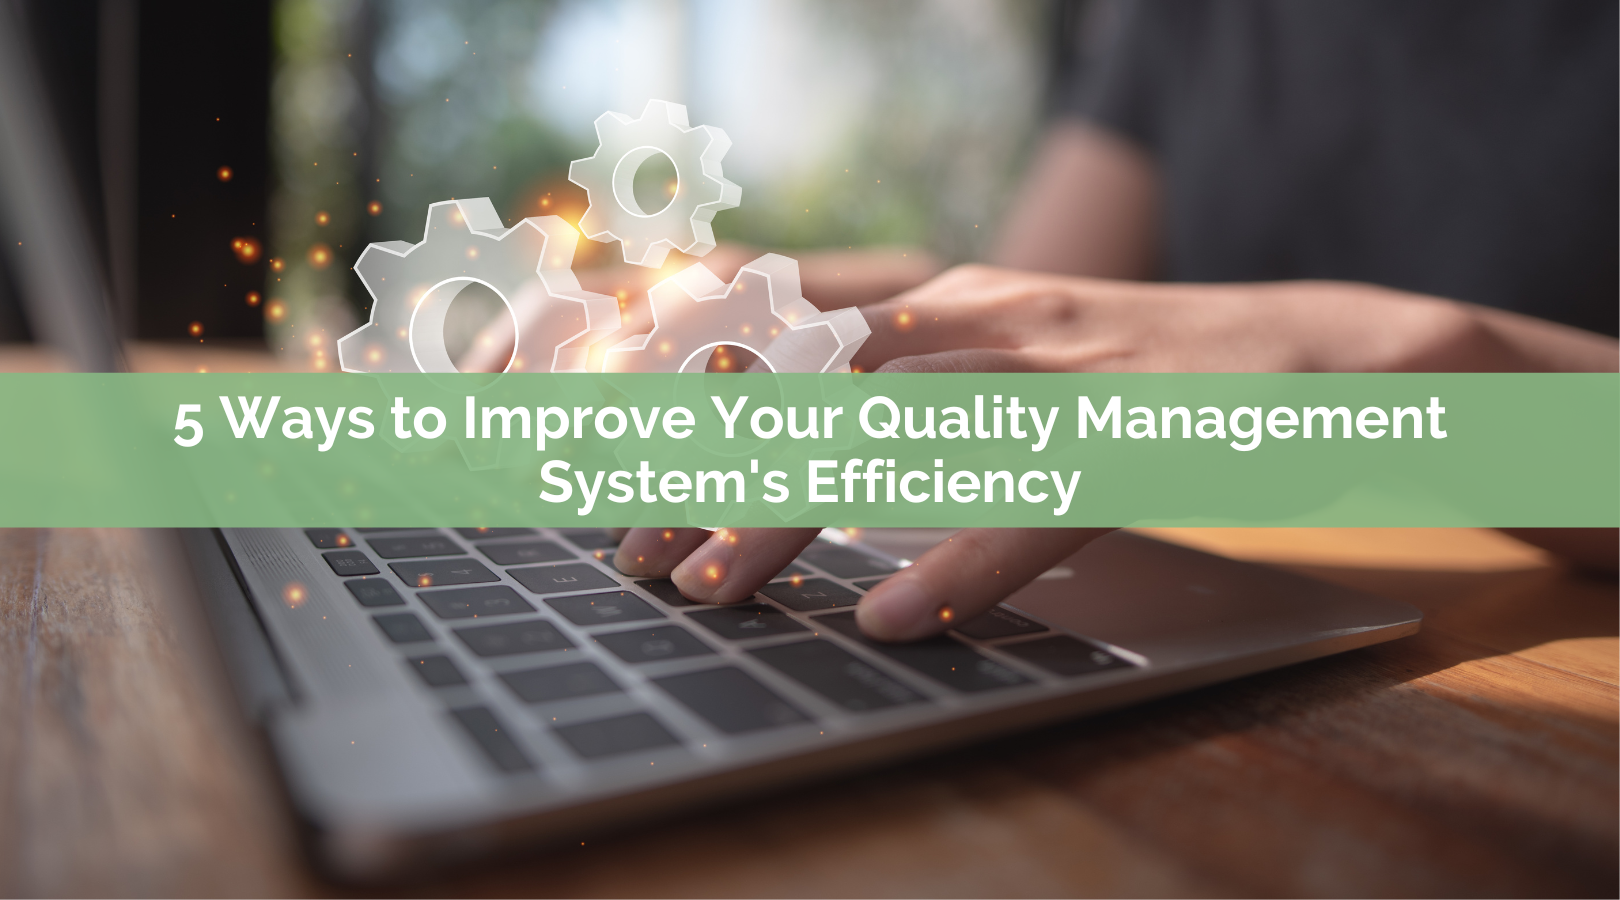 5 Ways to Improve Your Quality Management System's Efficiency